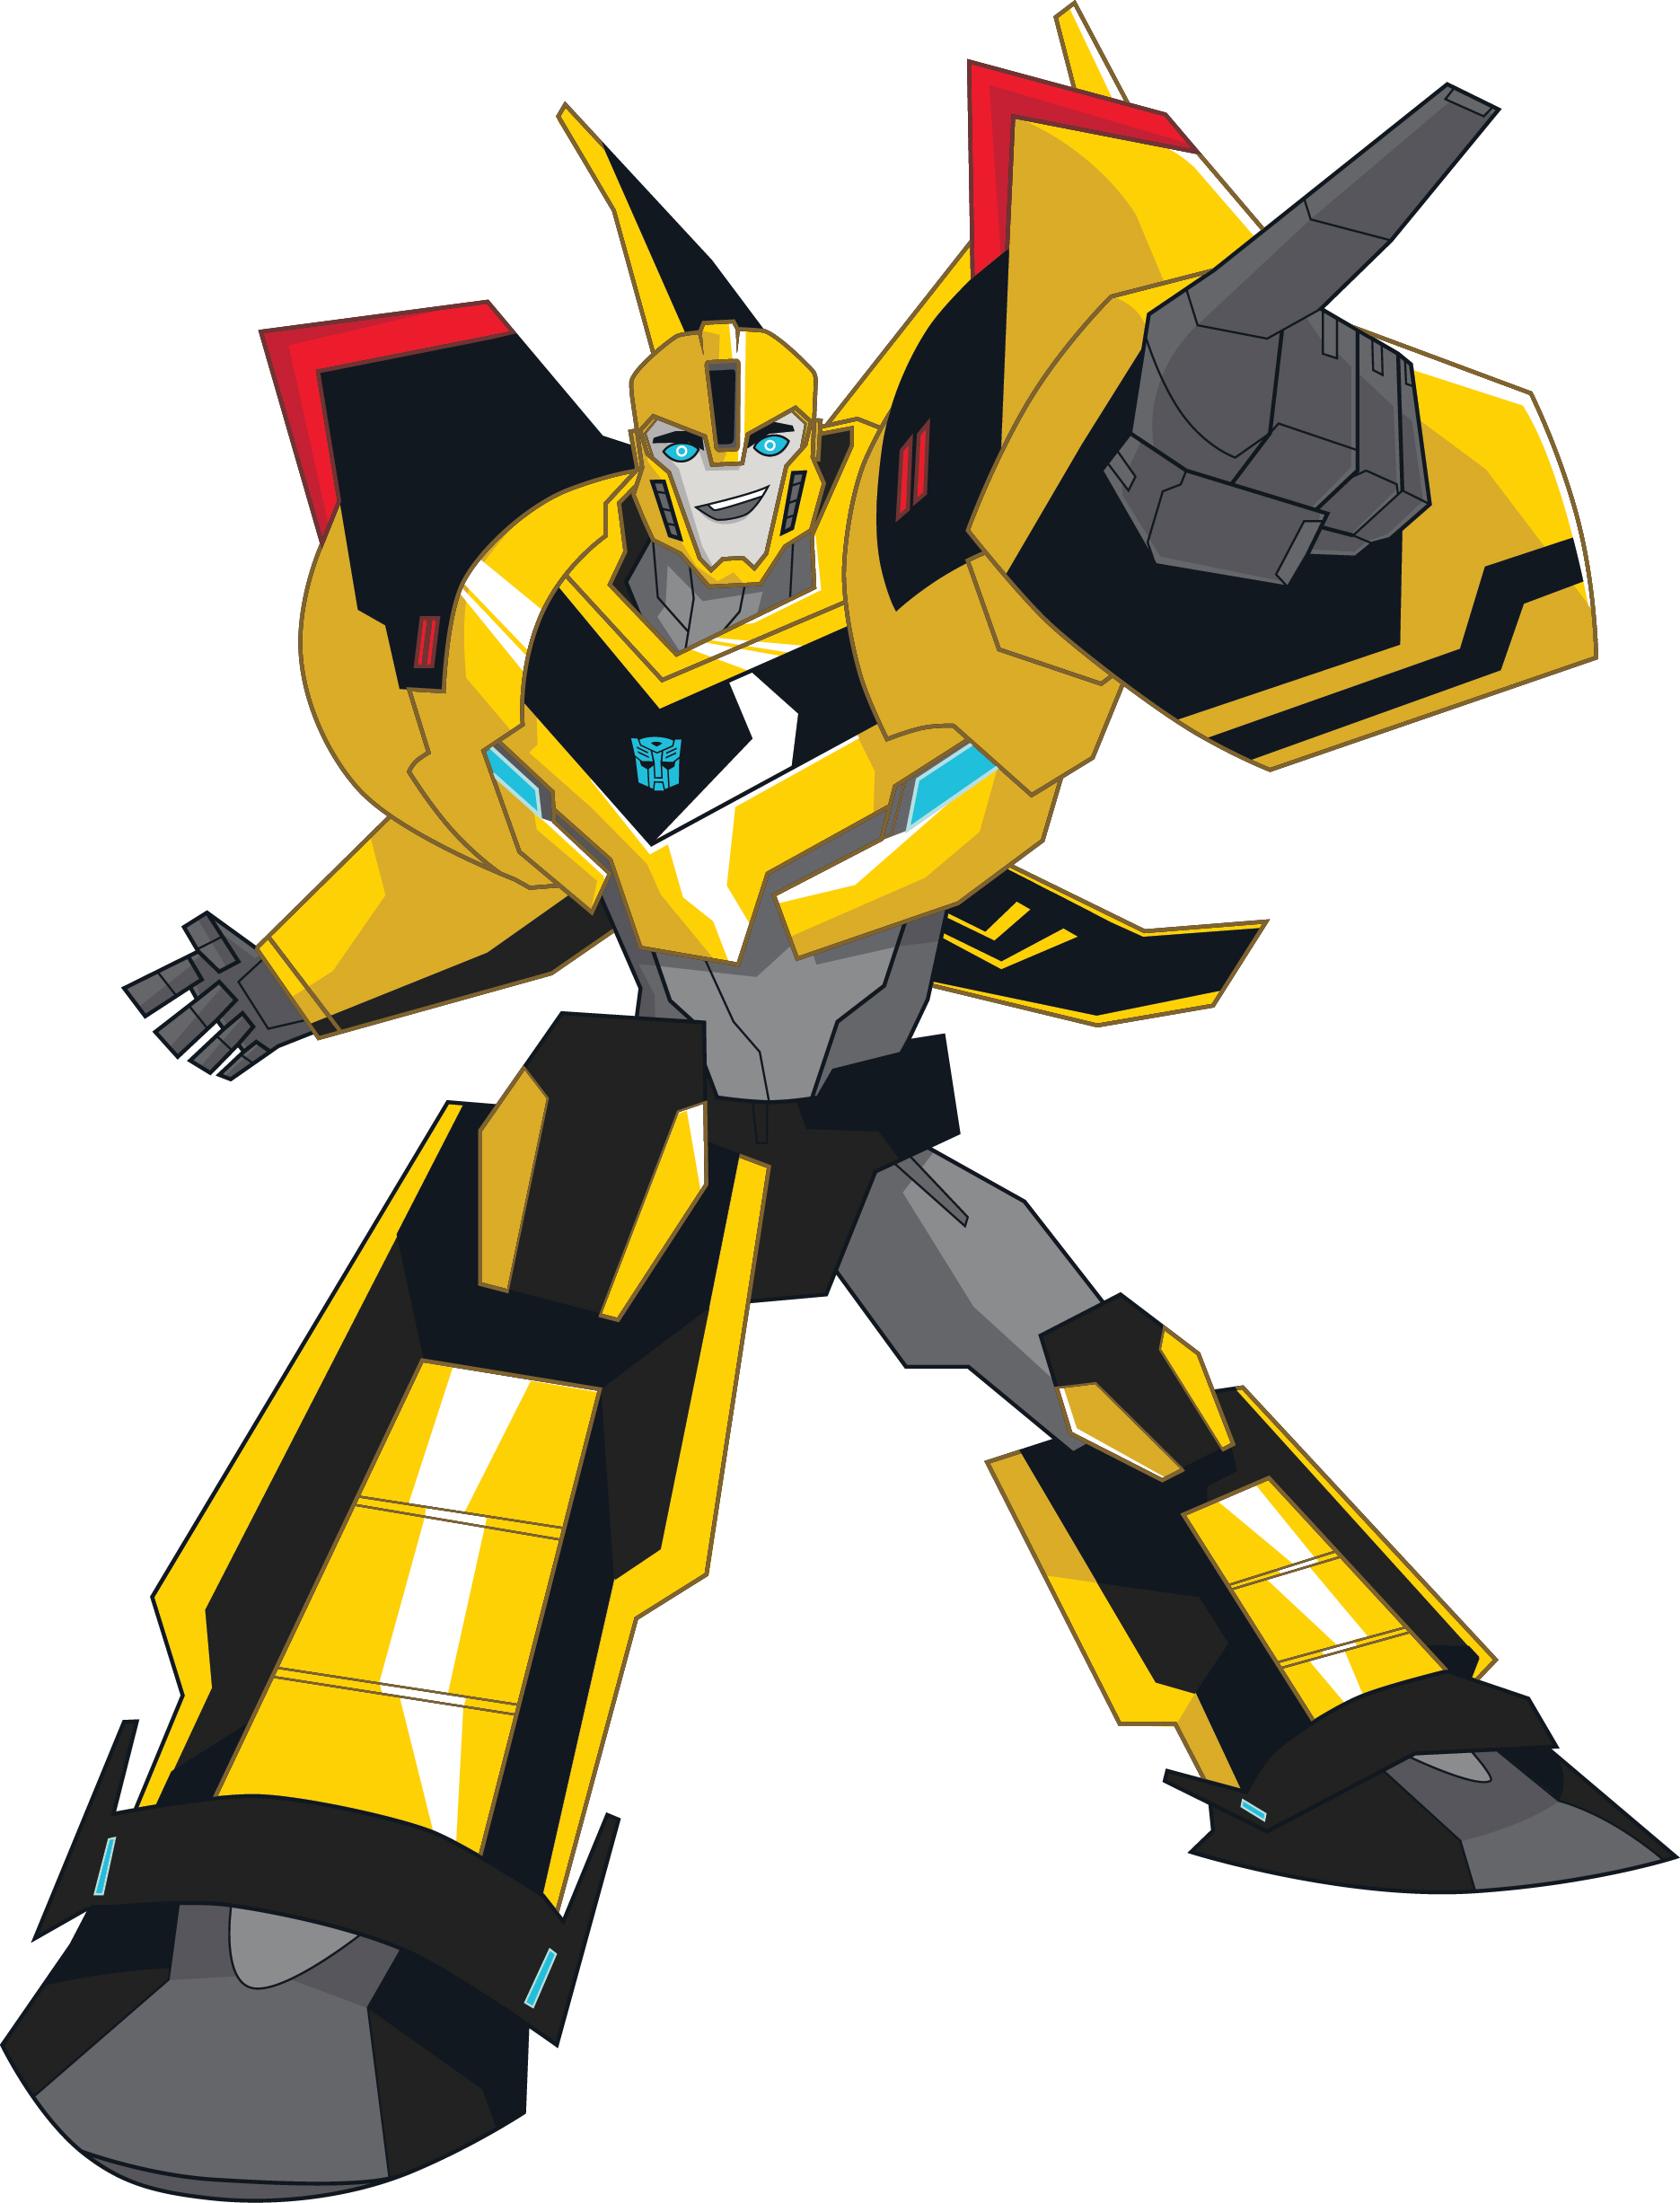 Transformer Animated Bumblebee - ClipArt Best